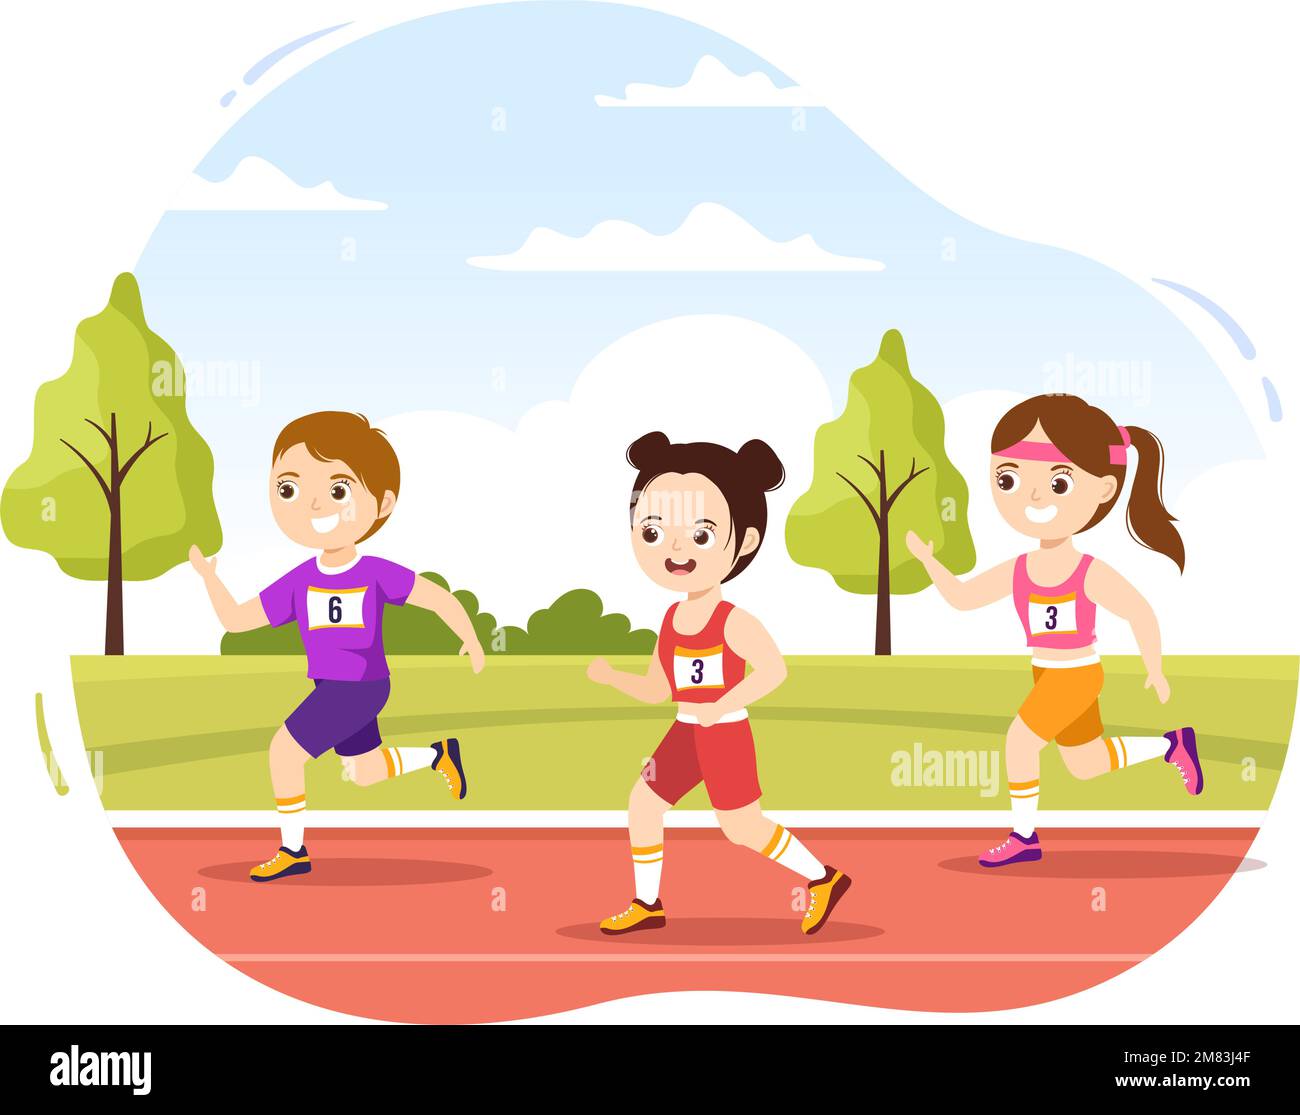 Marathon Race Illustration with Kids Running, Jogging Sport Tournament and Run to Reach the Finish Line in Flat Cartoon Hand Drawn Template Stock Vector